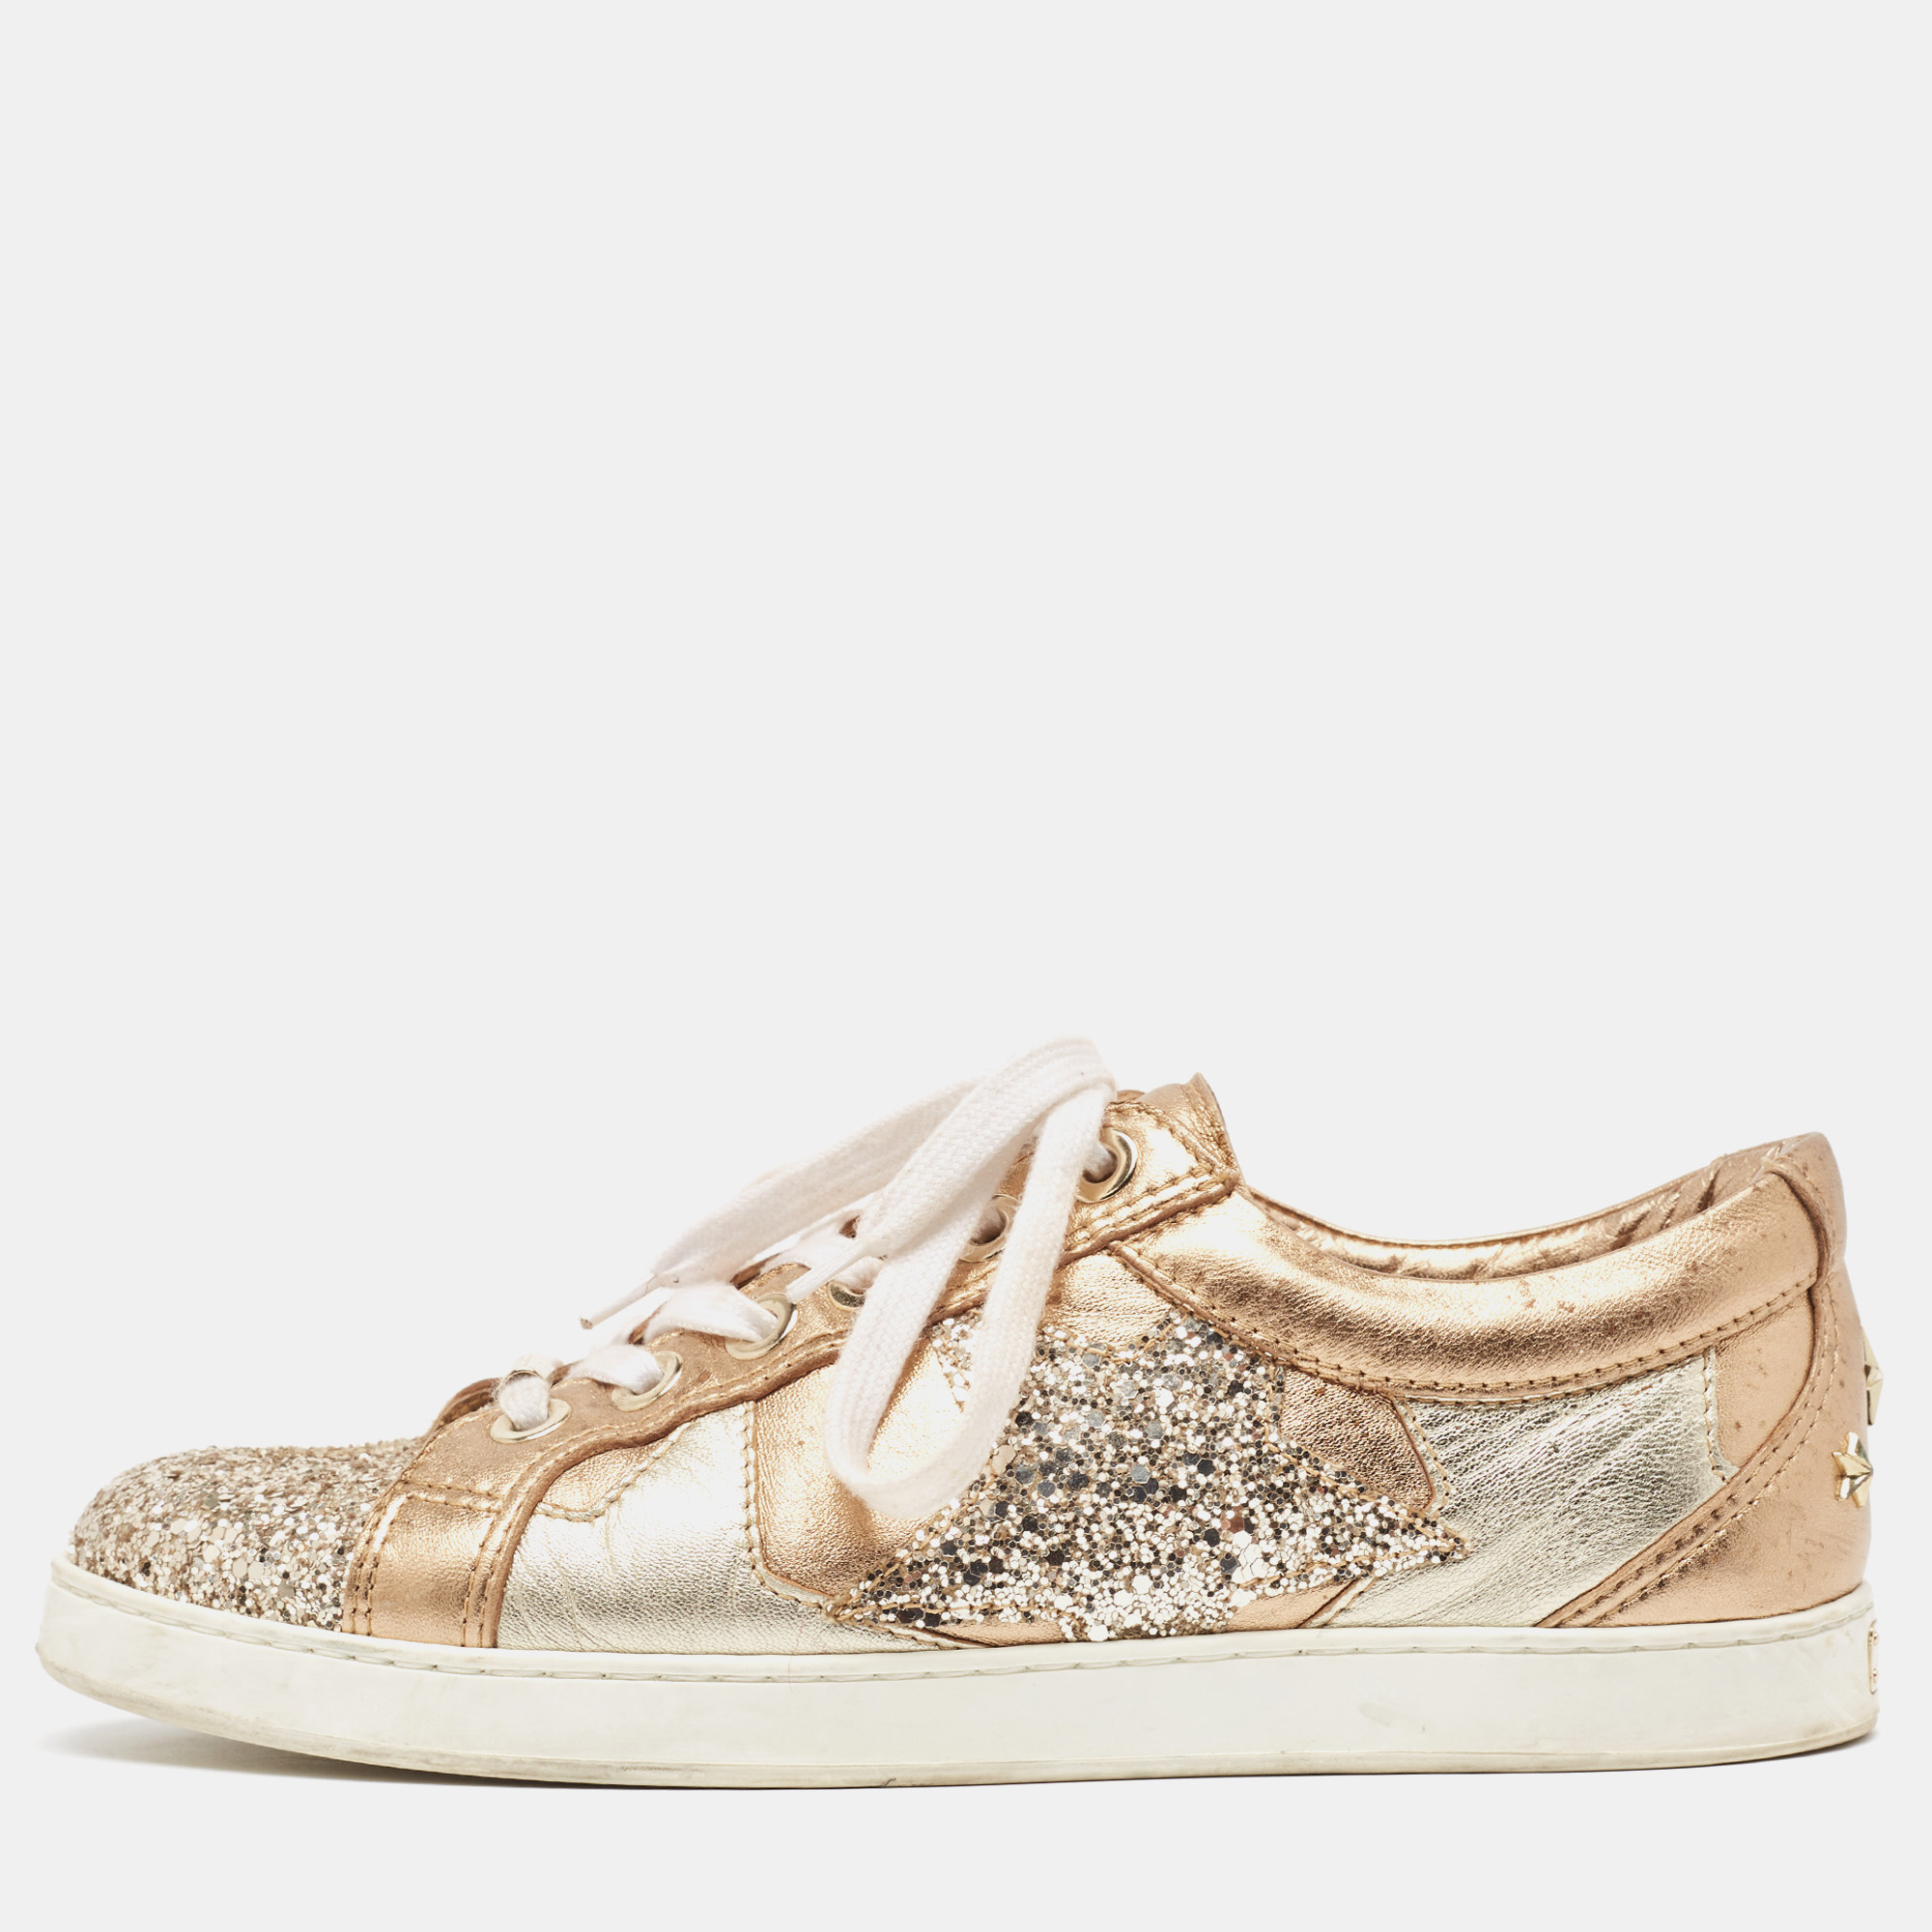 Jimmy Choo Metallic Leather and Glitter Low Top Sneakers Size 39